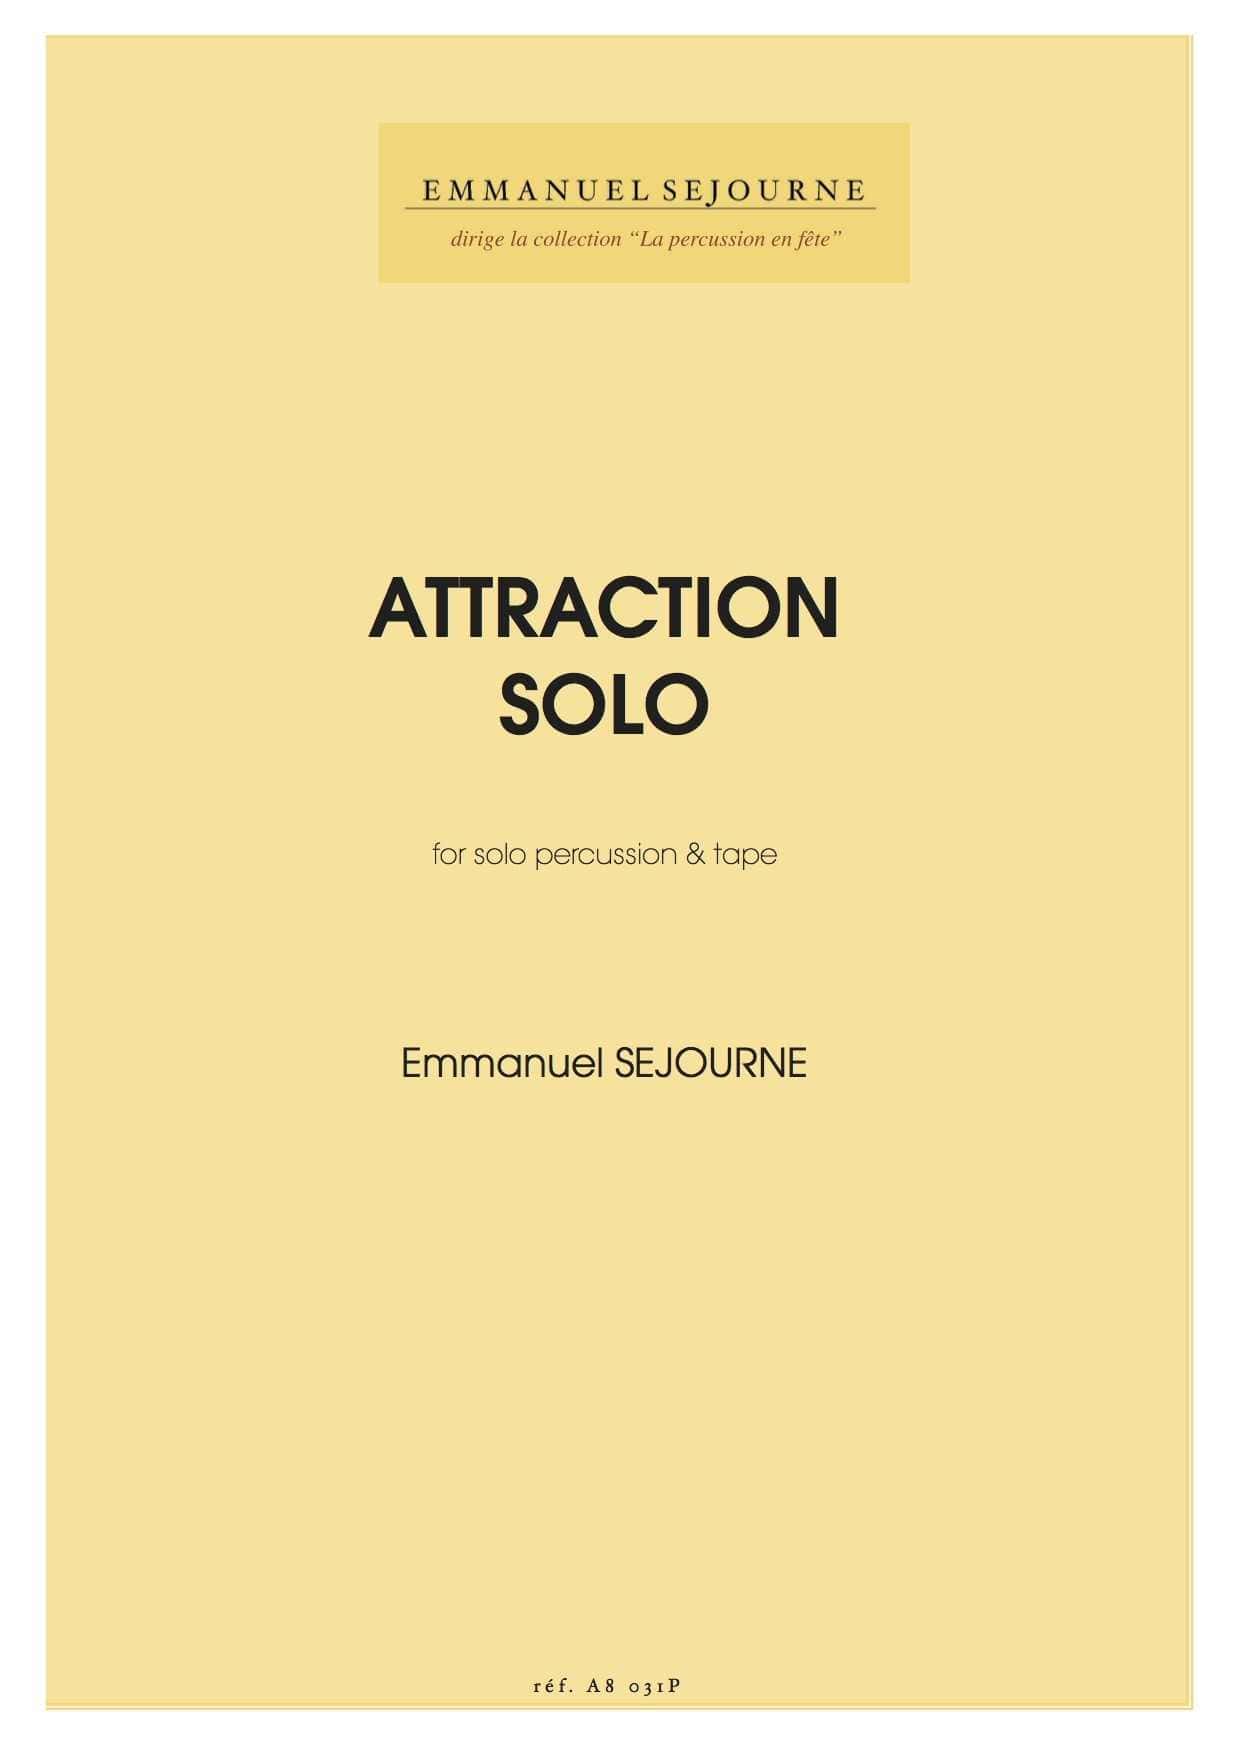 Attraction Solo by Emmanuel Sejourne